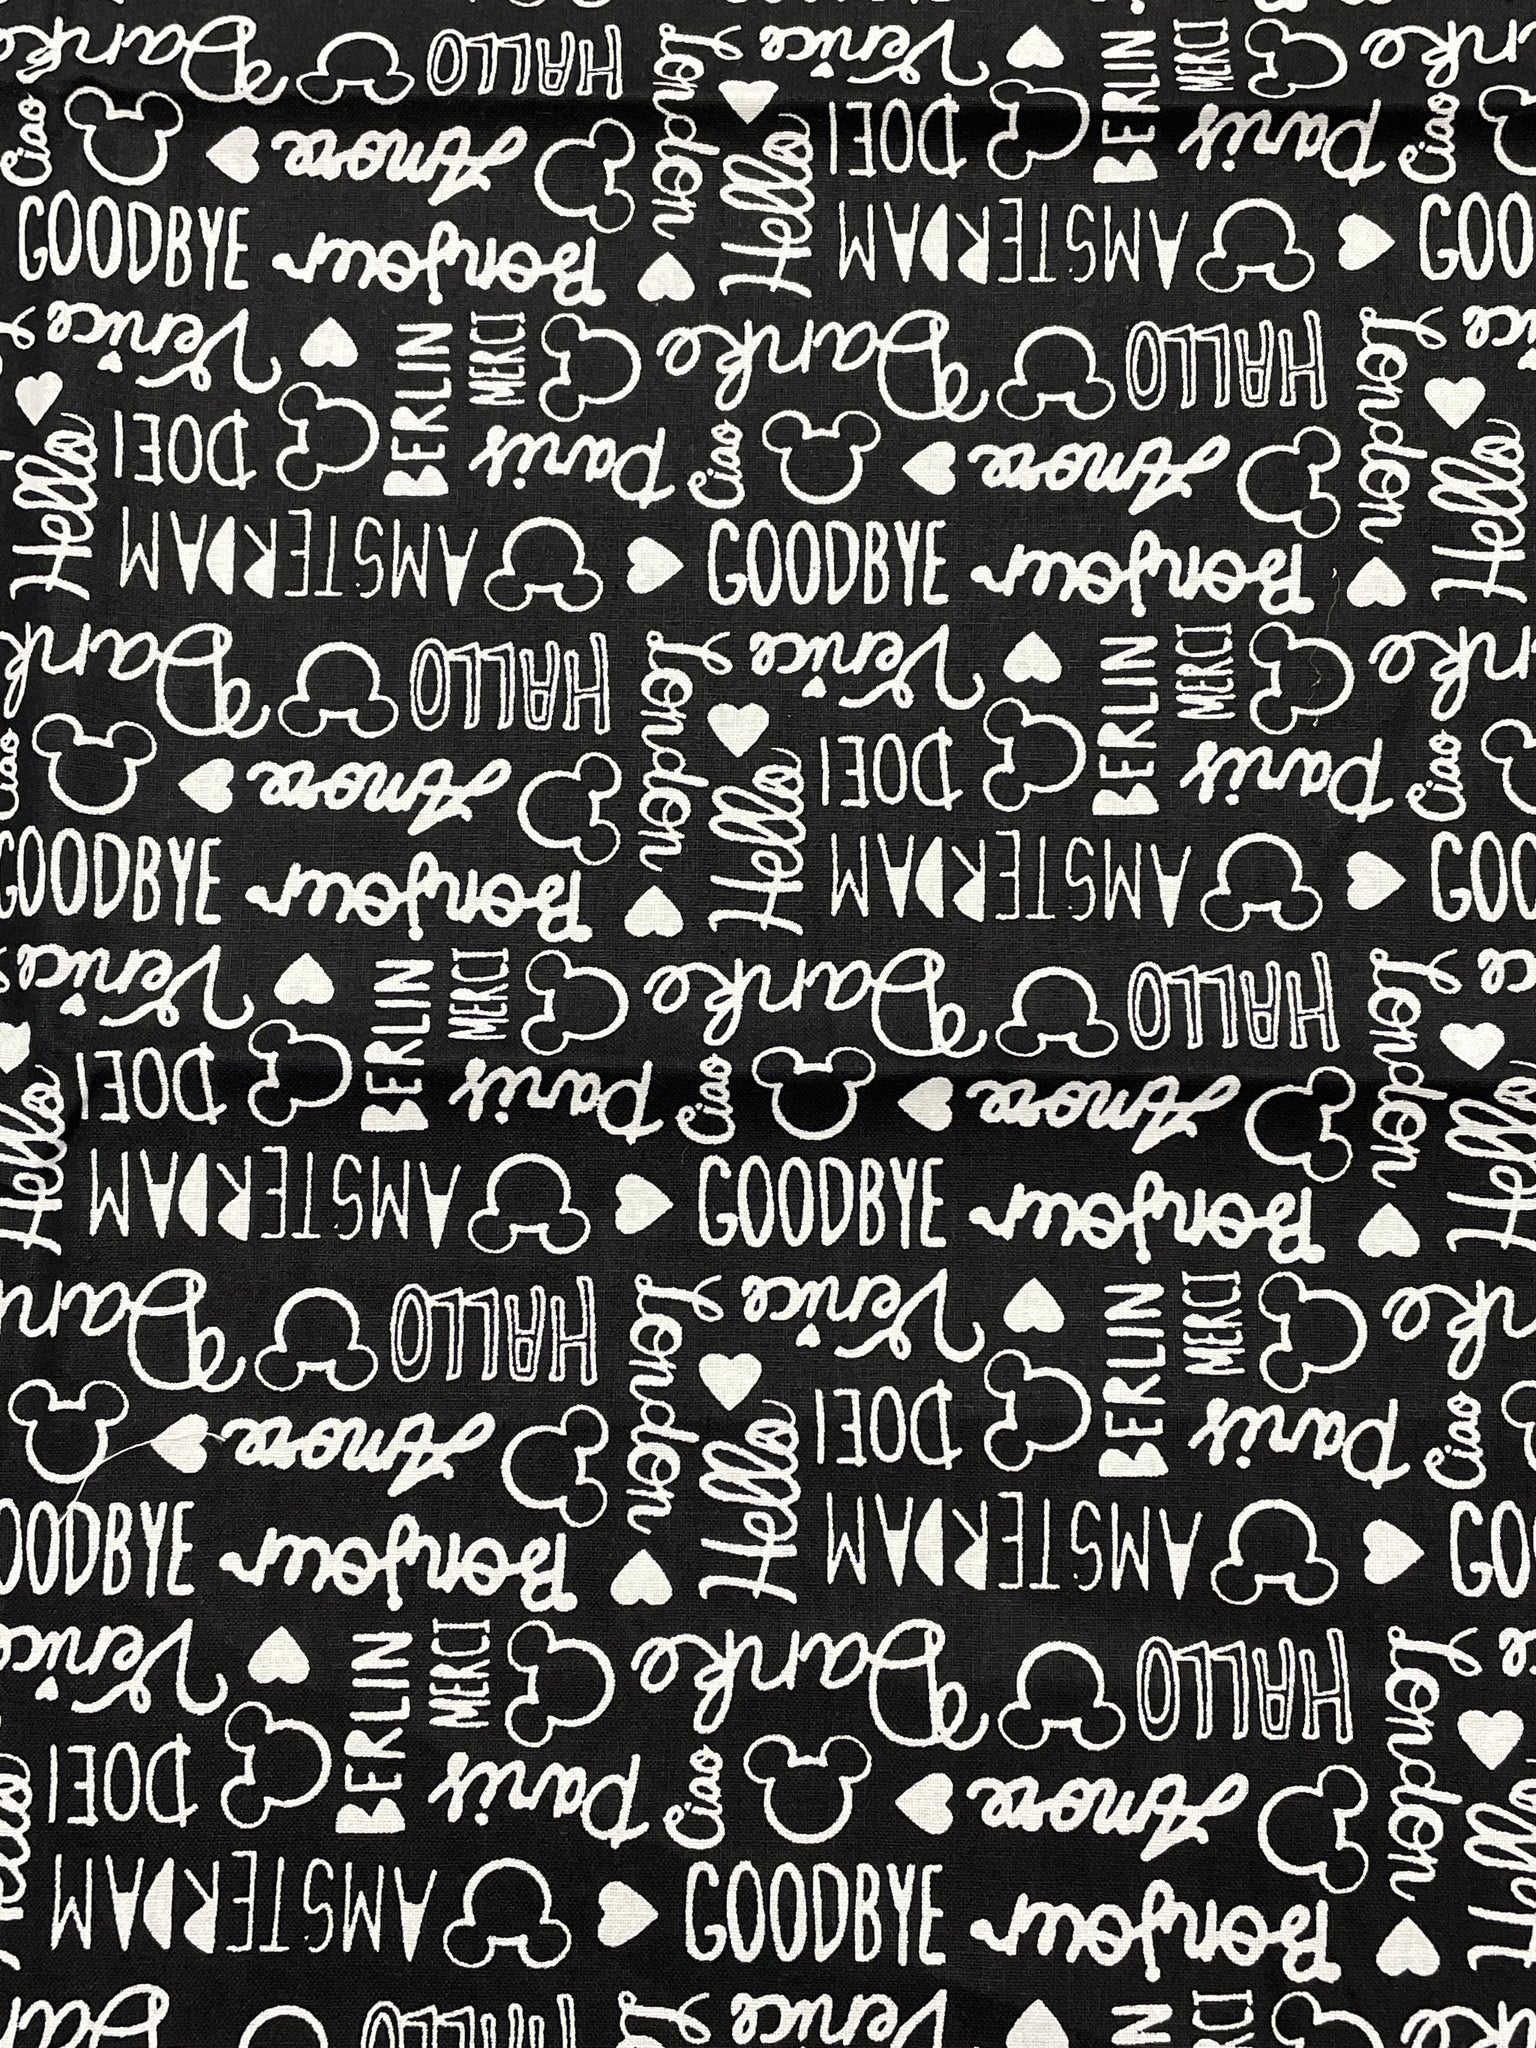 3/4 YD Quilting Cotton Remnant - Black with White Disney Writing